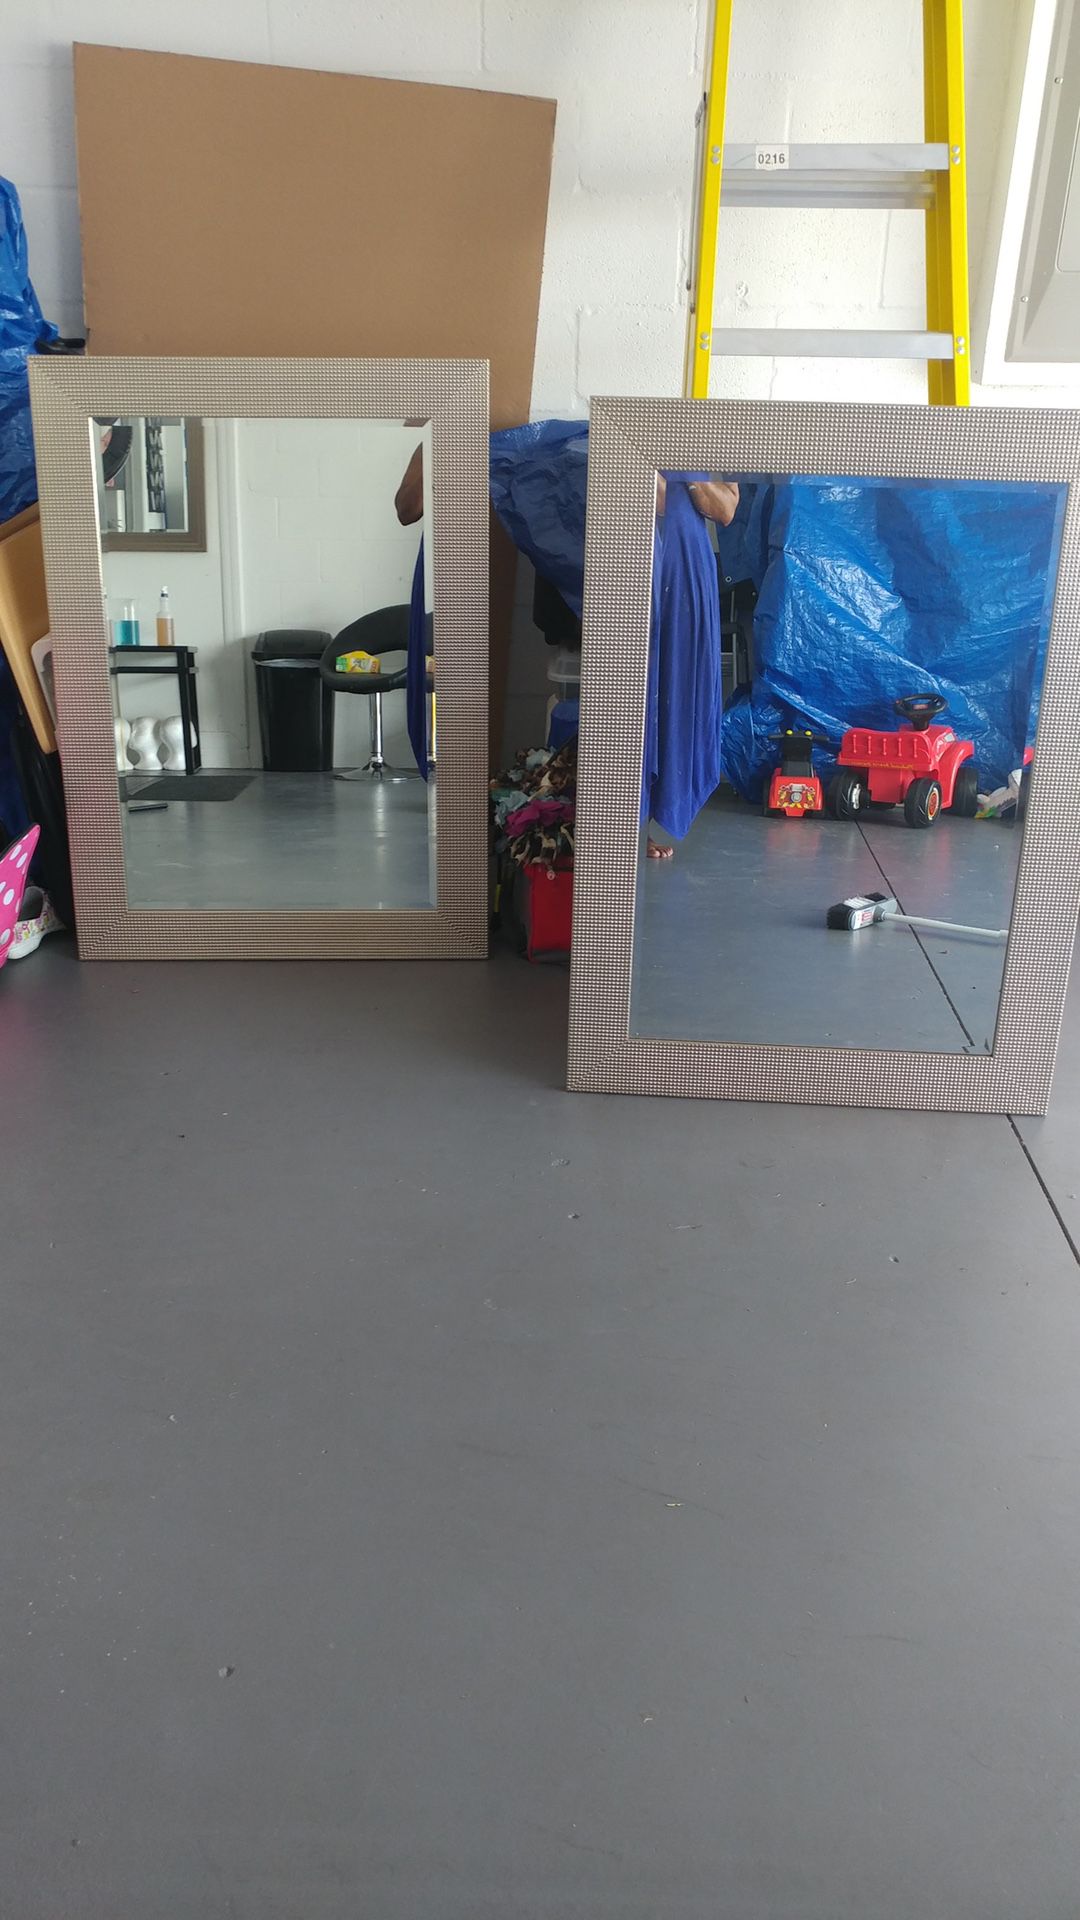 Two large wall mirrors